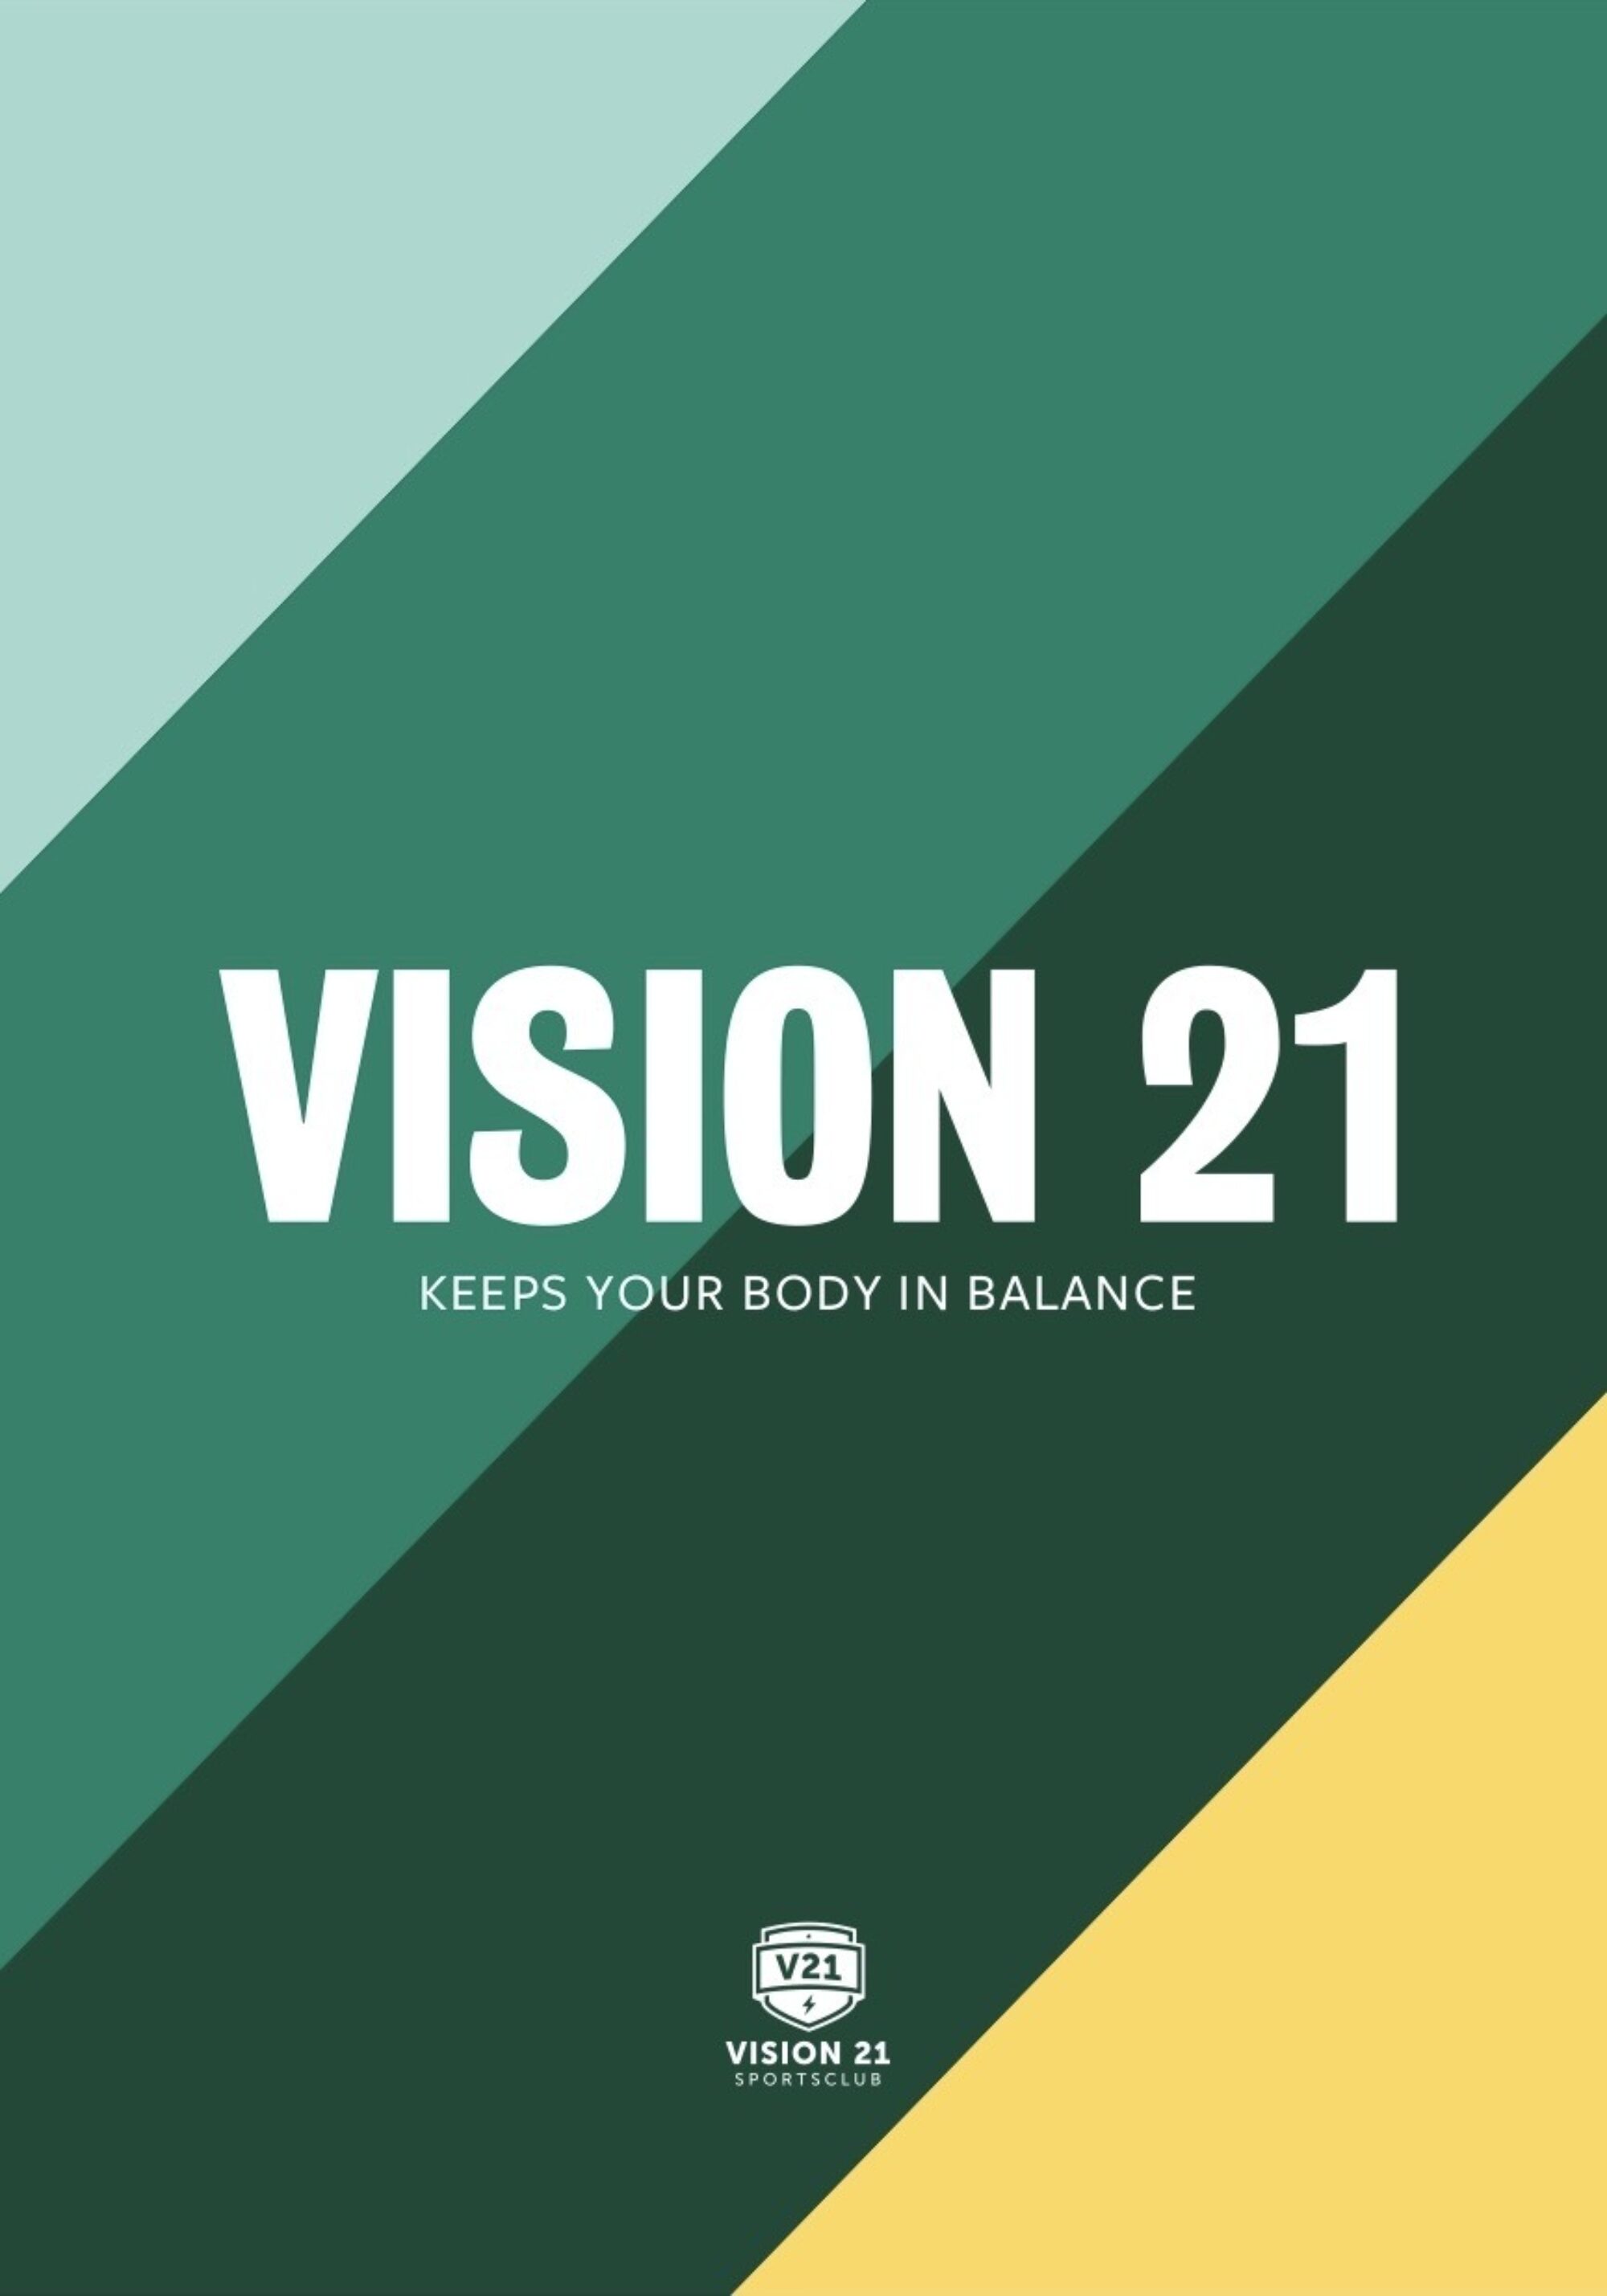 Vision 21 Roeselare Fitness